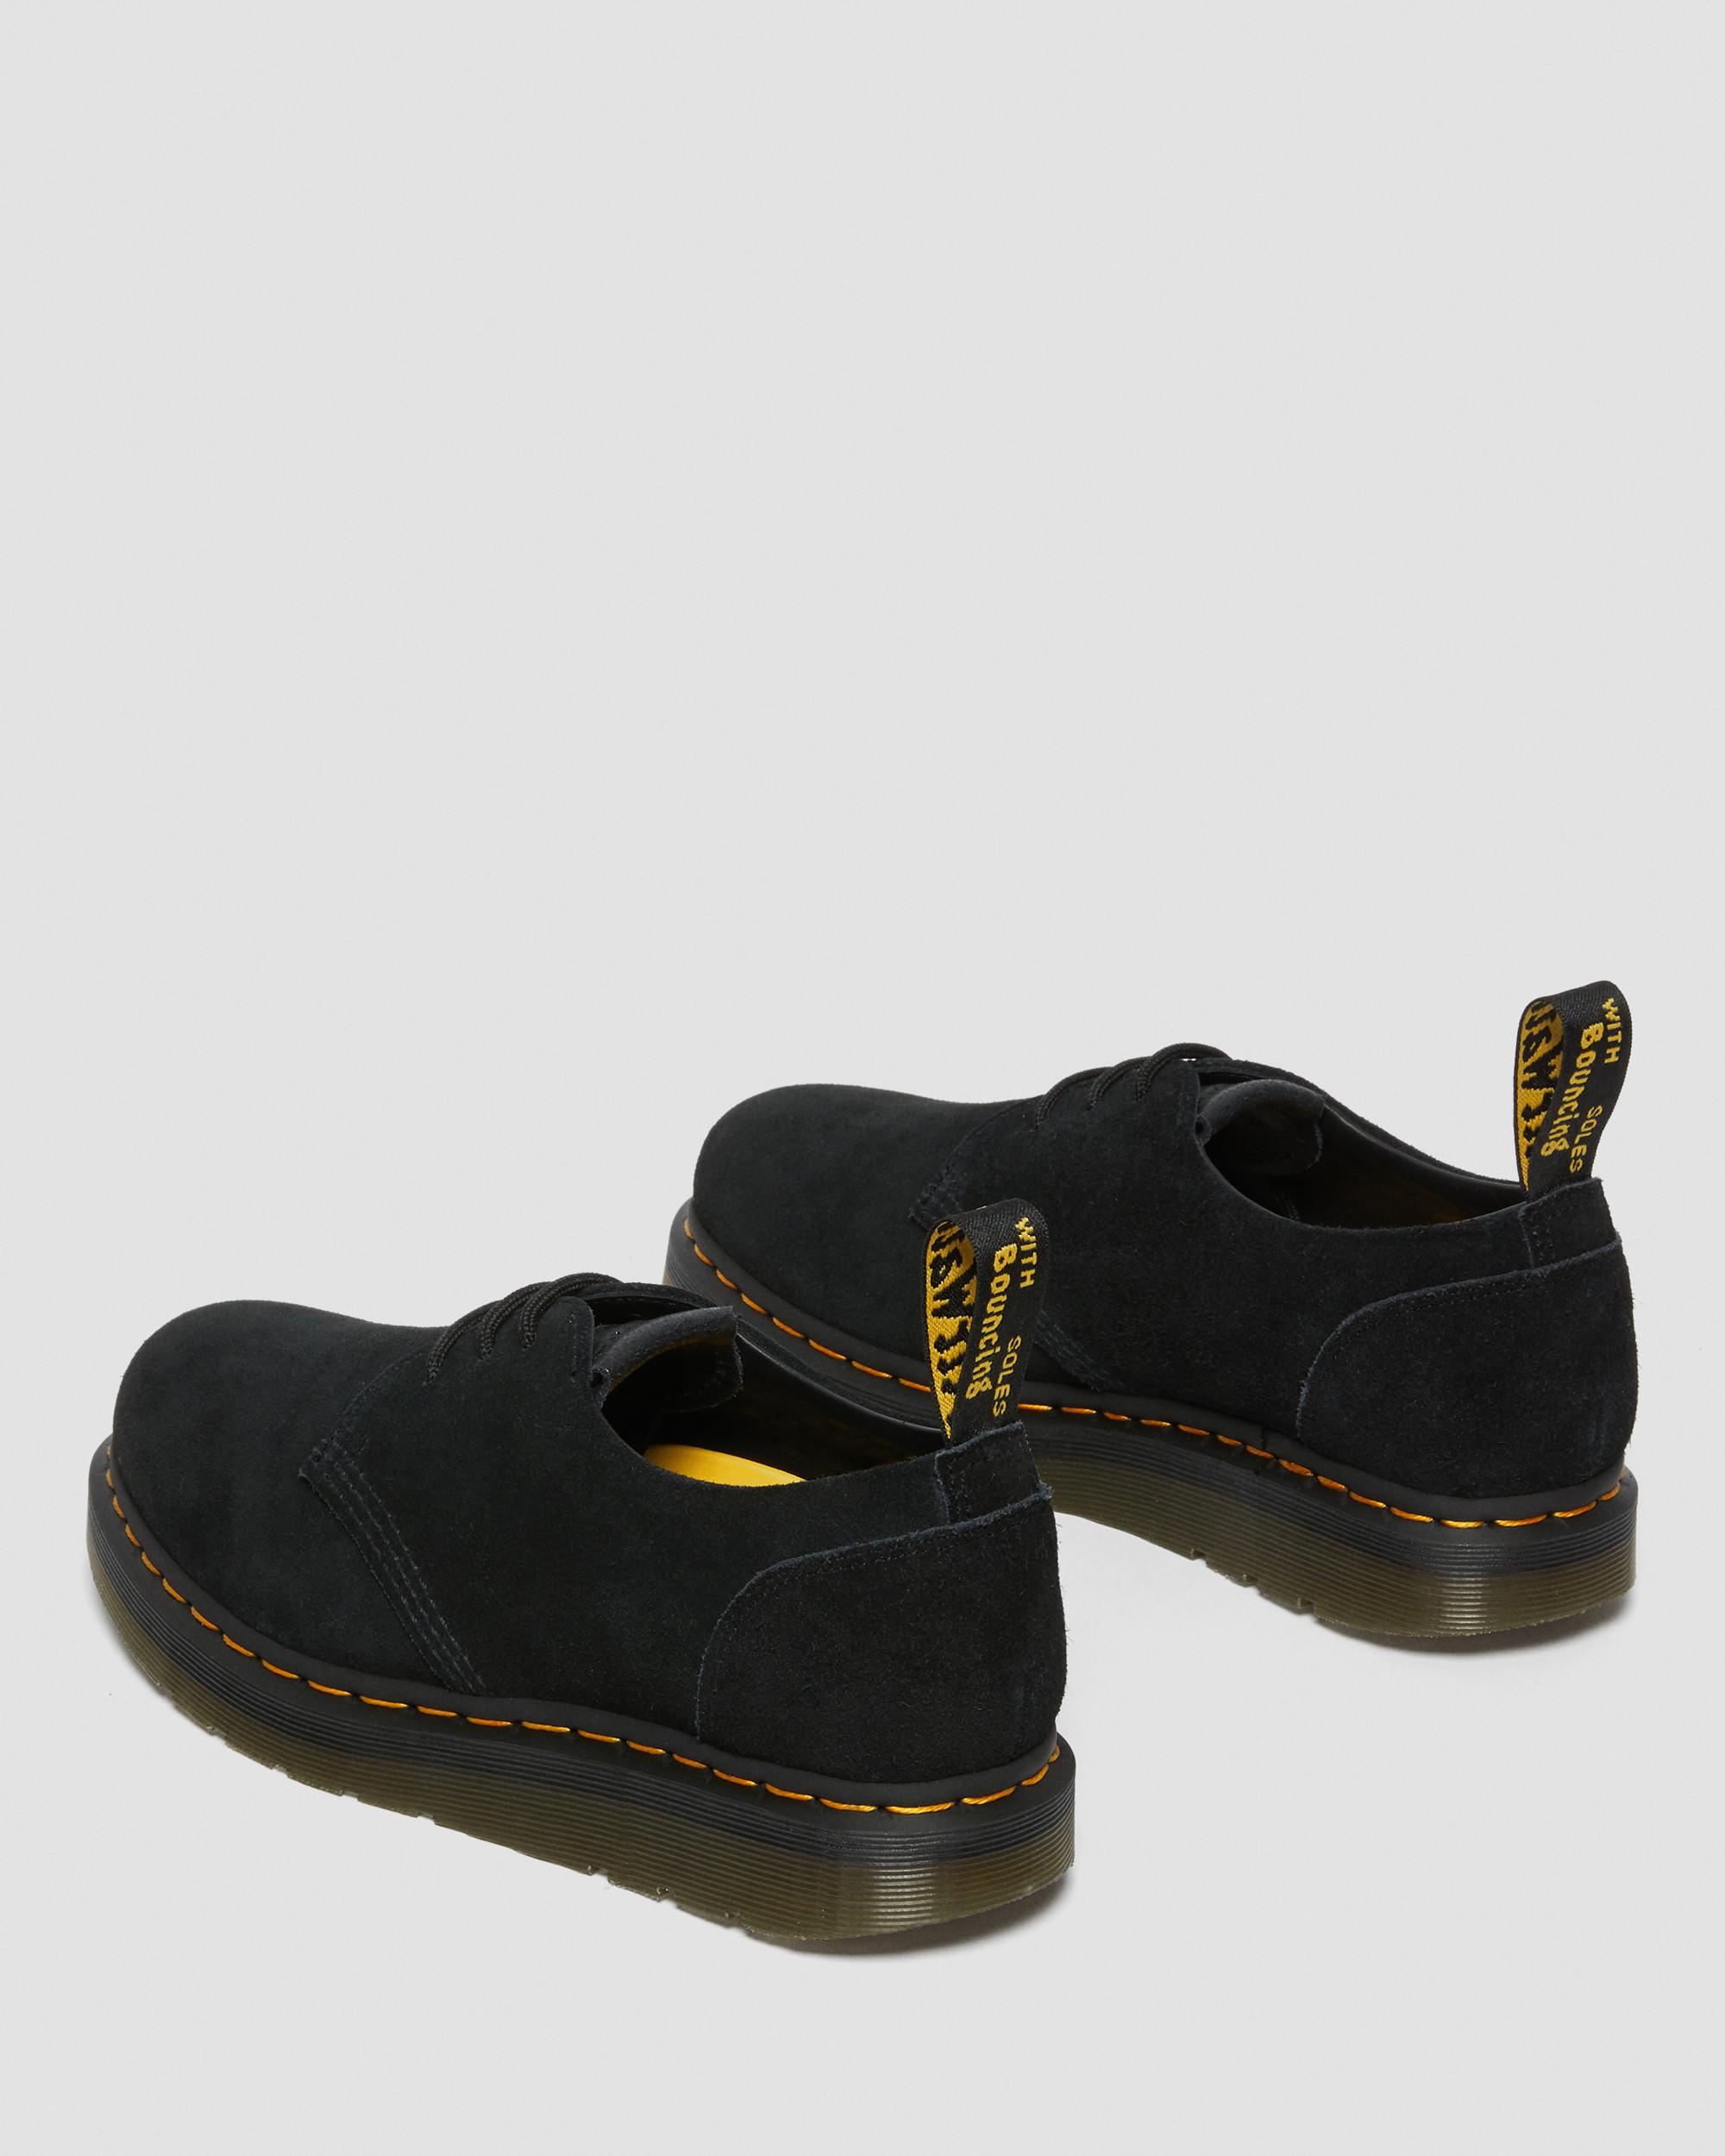 Berman Suede Leather Shoes in Black | Dr. Martens